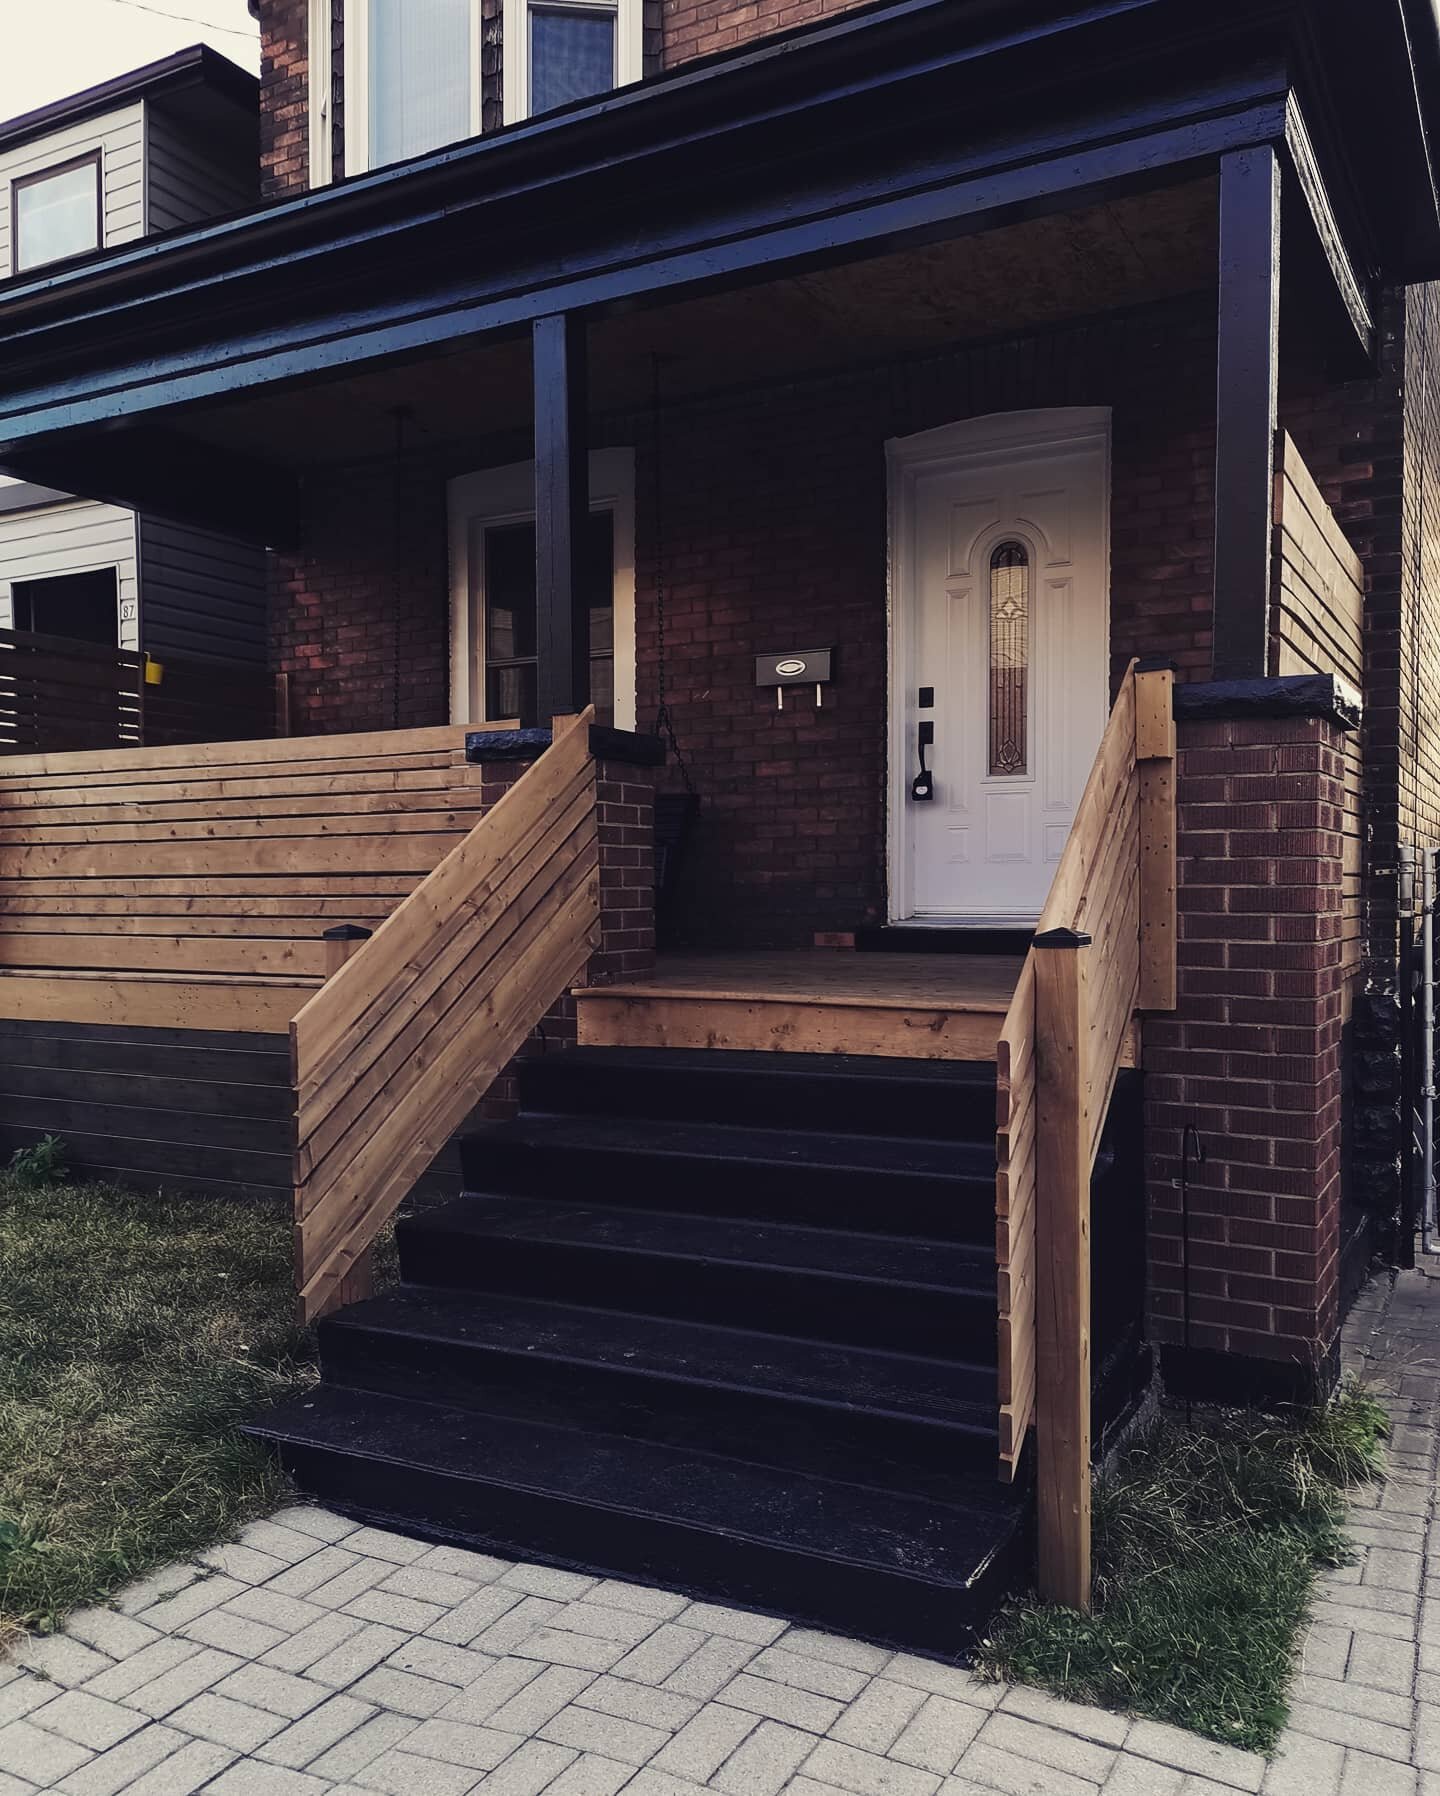 MONDAY!Back to the grind! Take a look at this front porch deck we completed in #hamilton! We also built a custom swinging bench which accents everything beautifully 👷👍 #kingsgrovecontracting👊 
.
.
.
.
#Hamilton #hamiltonontario #deckbuilding #porc